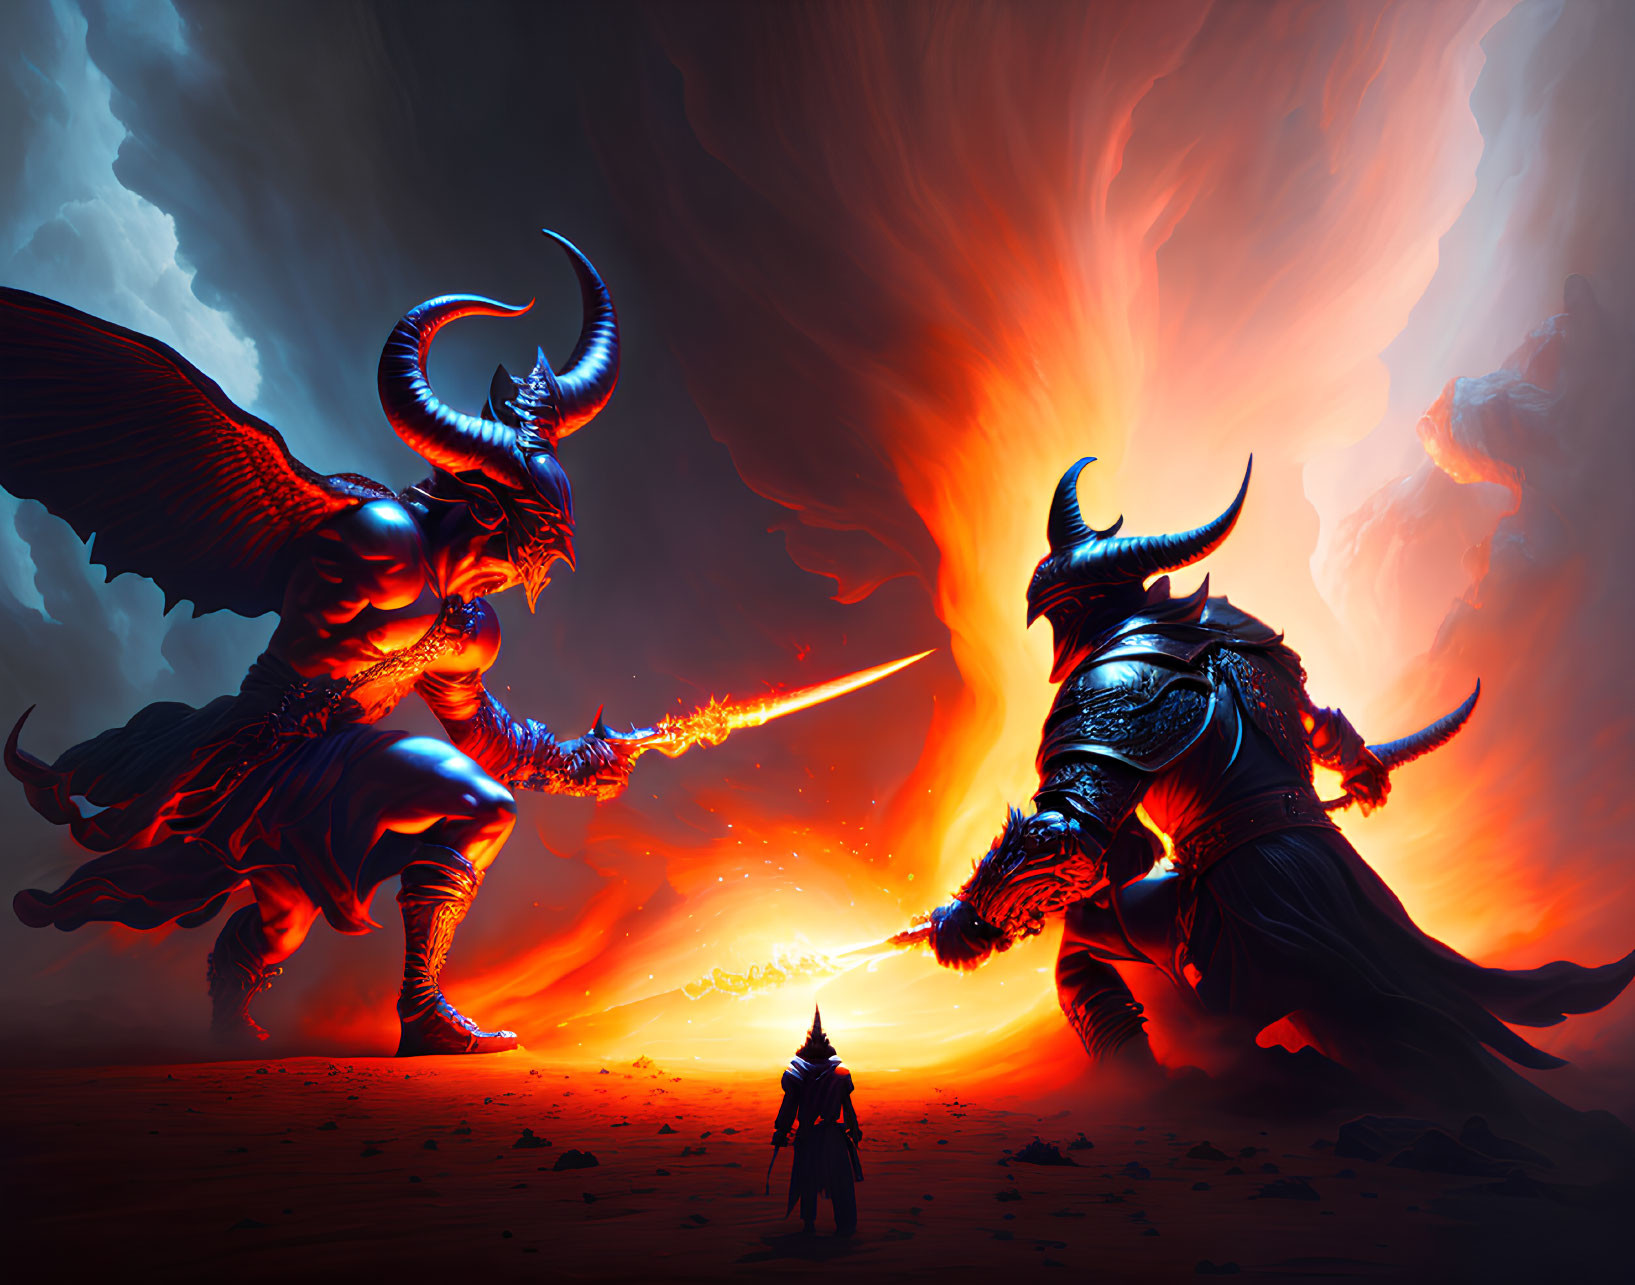 Horned warriors in combat with fiery weapons under red sky